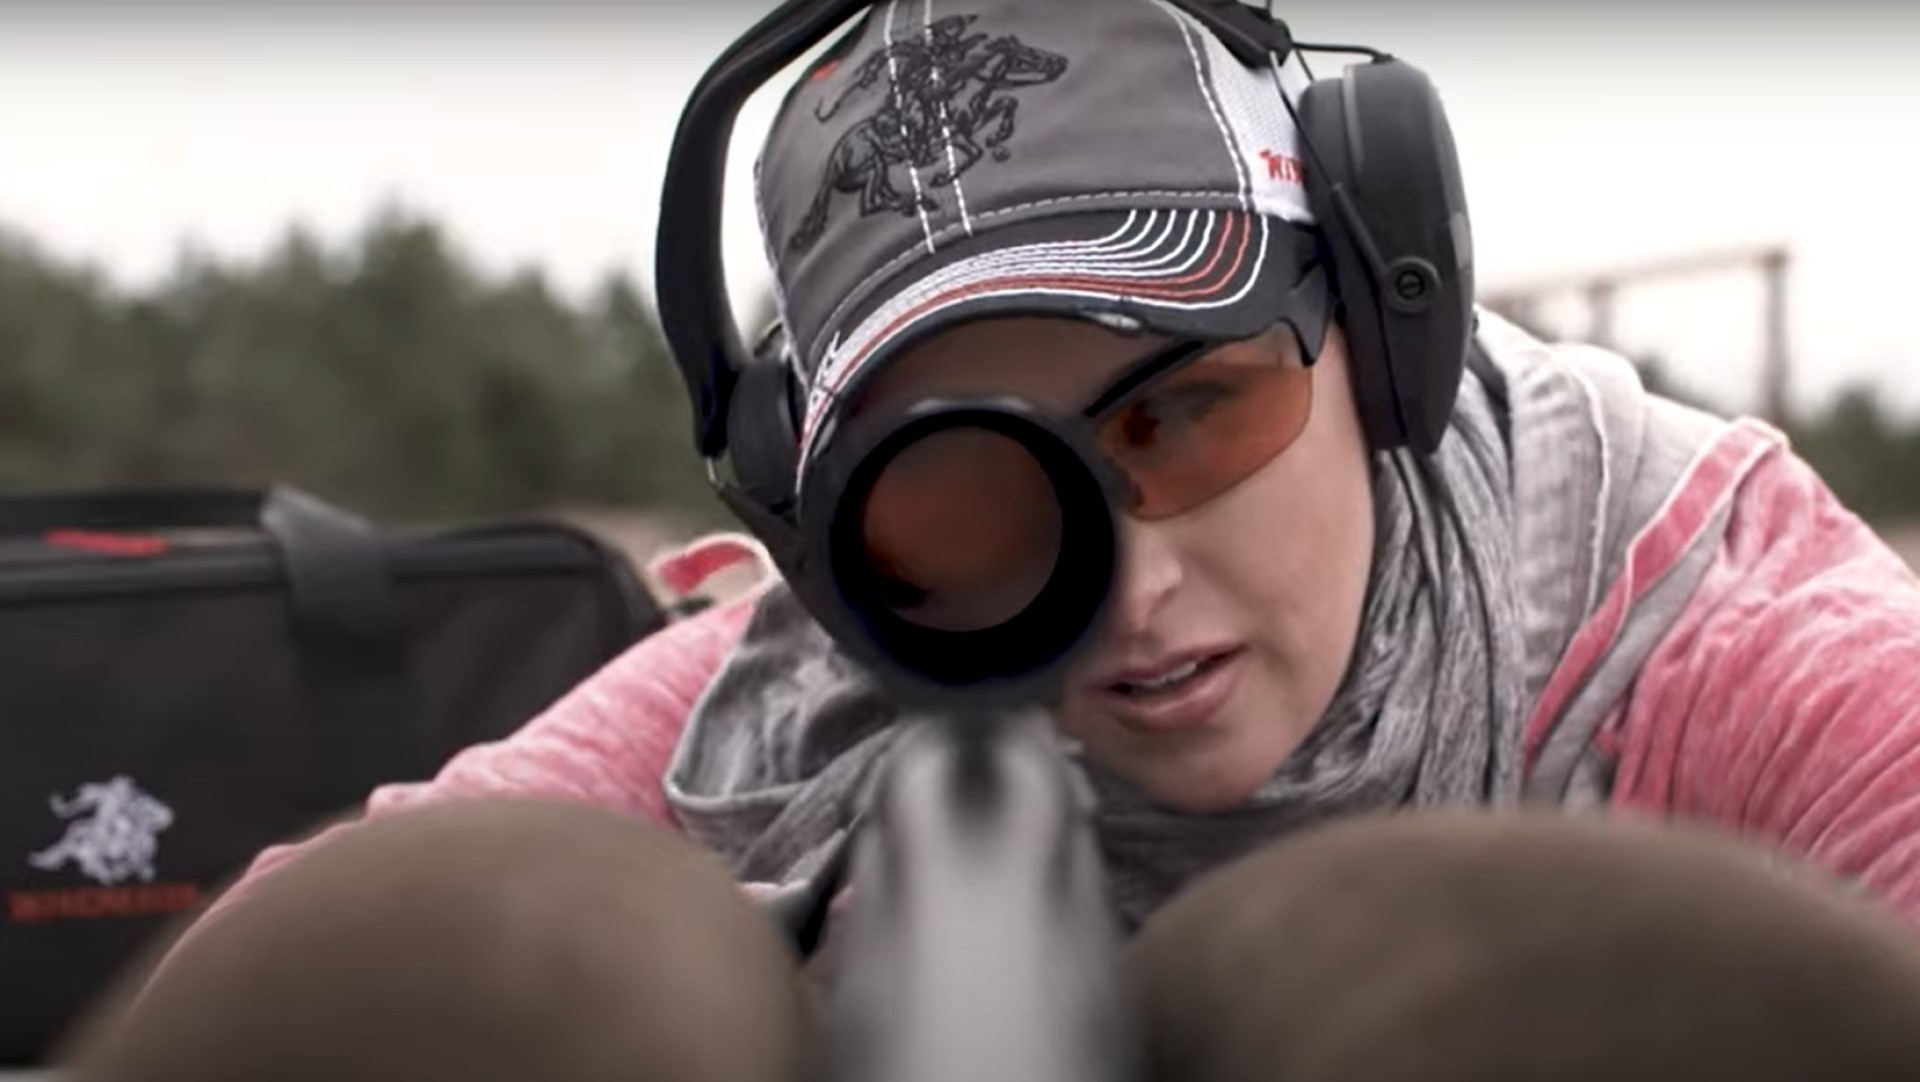 nra-women-coming-in-2022-winchester-s-shoot-united